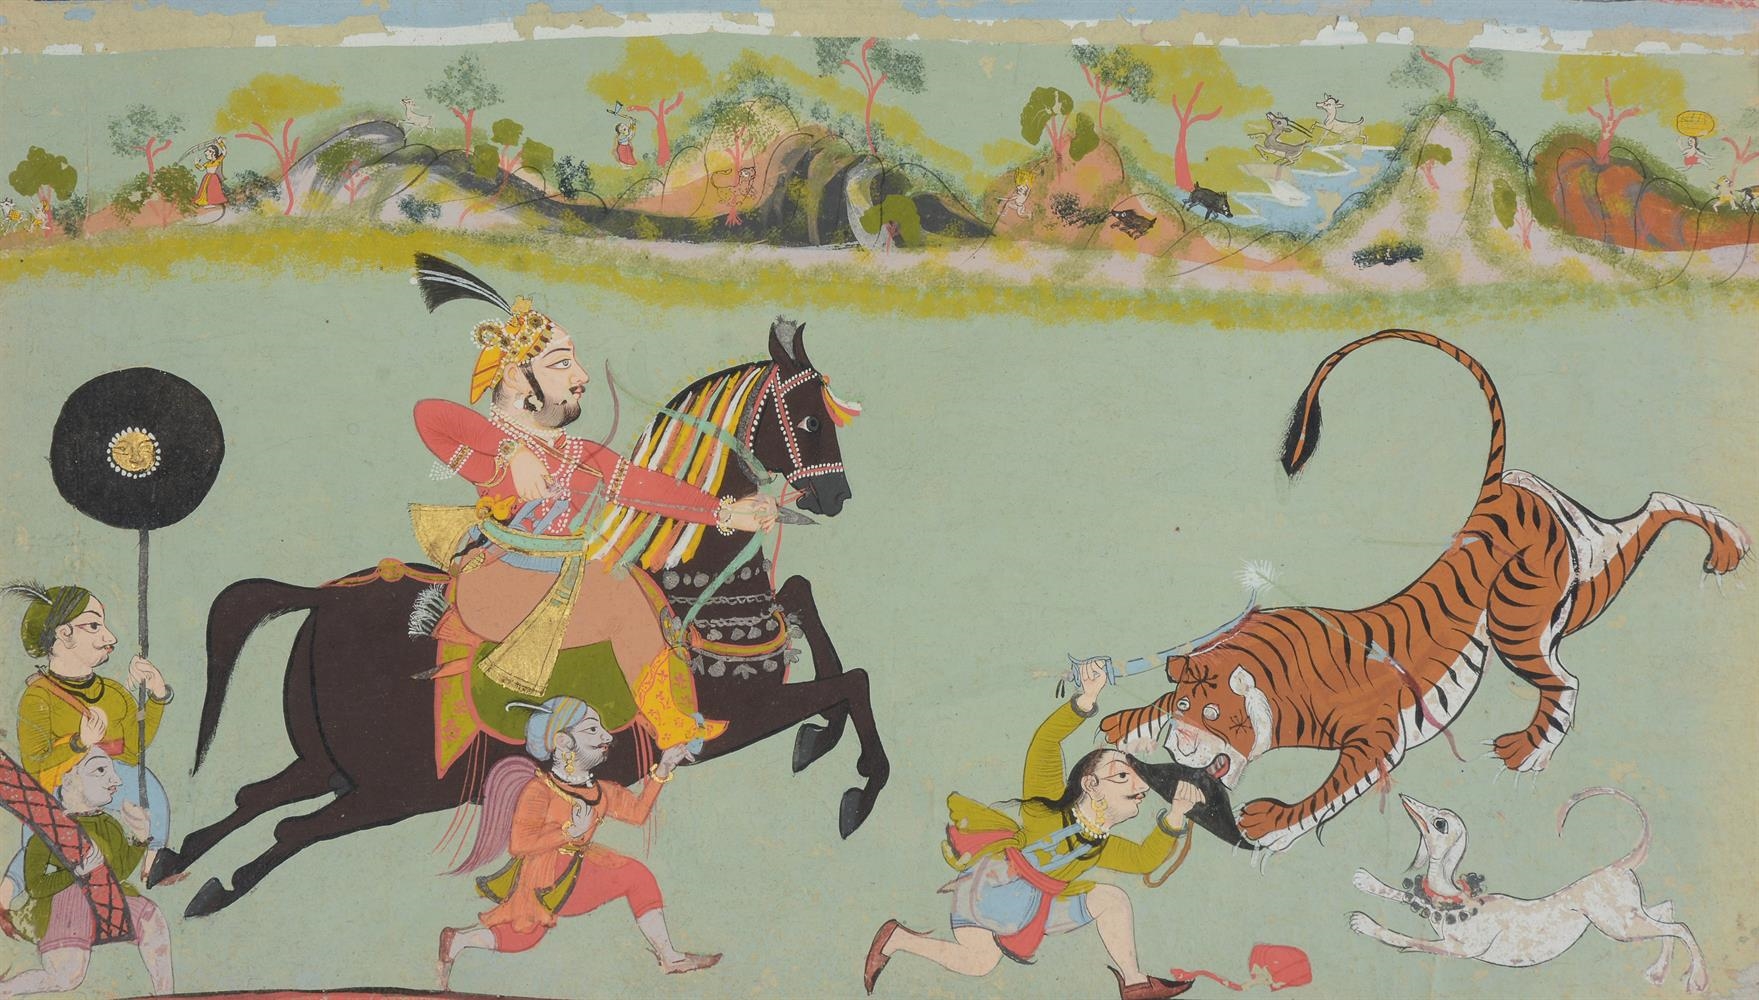 A Mewar Painting of a Ruler by Rajasthan School, 19th Century, mid-19th century